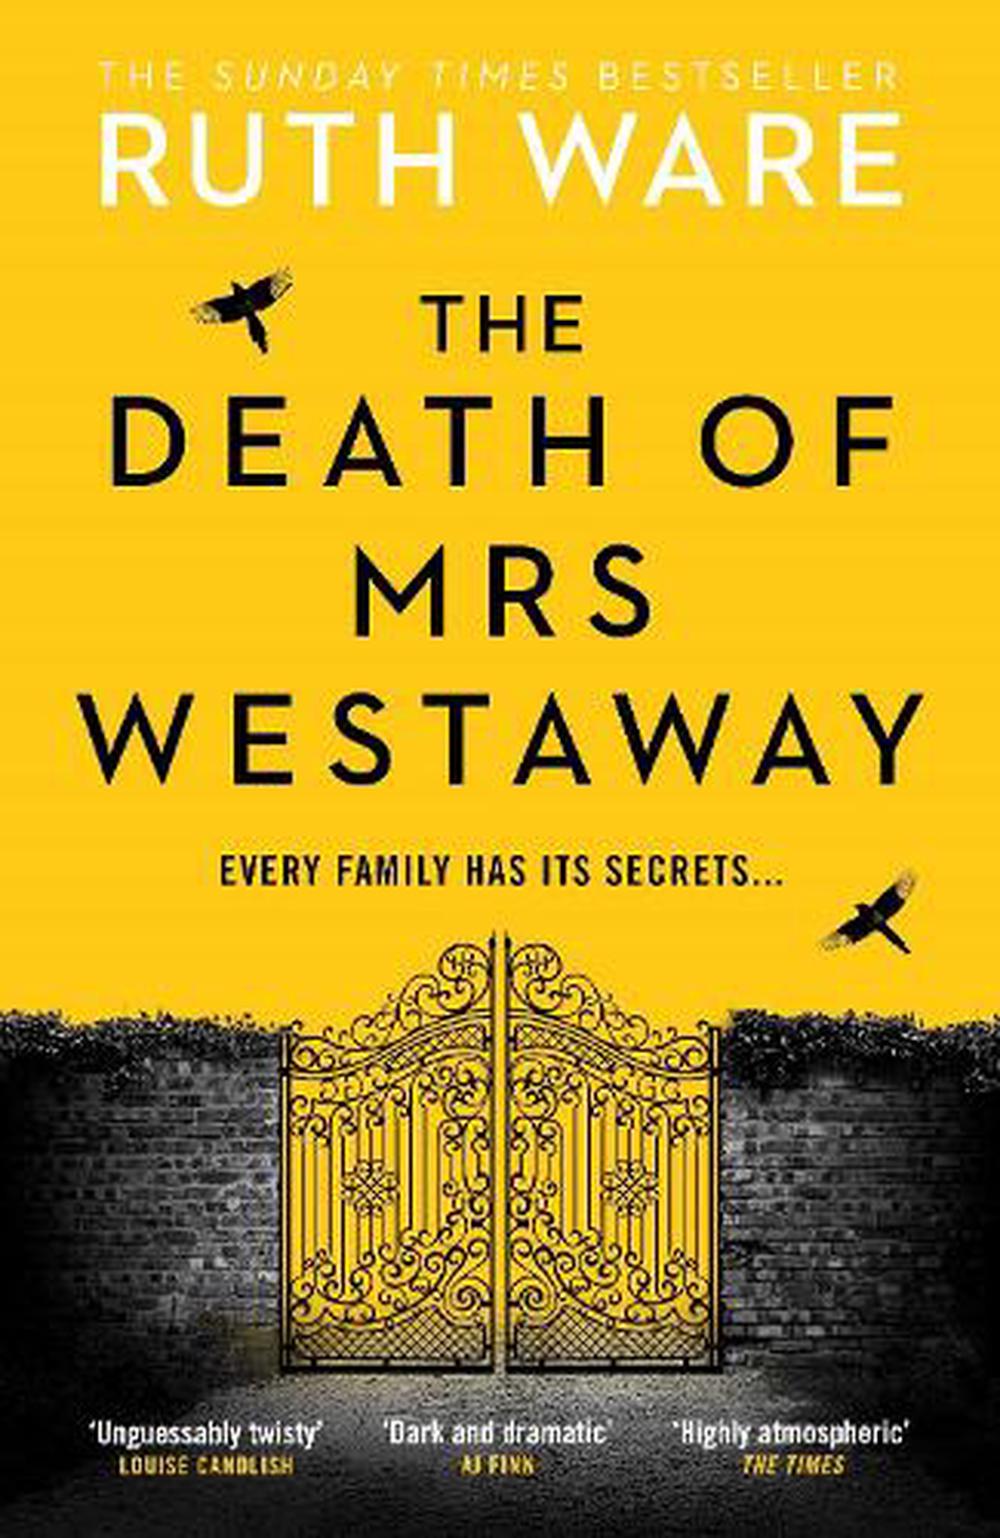 ruth ware the death of mrs westaway synopsis